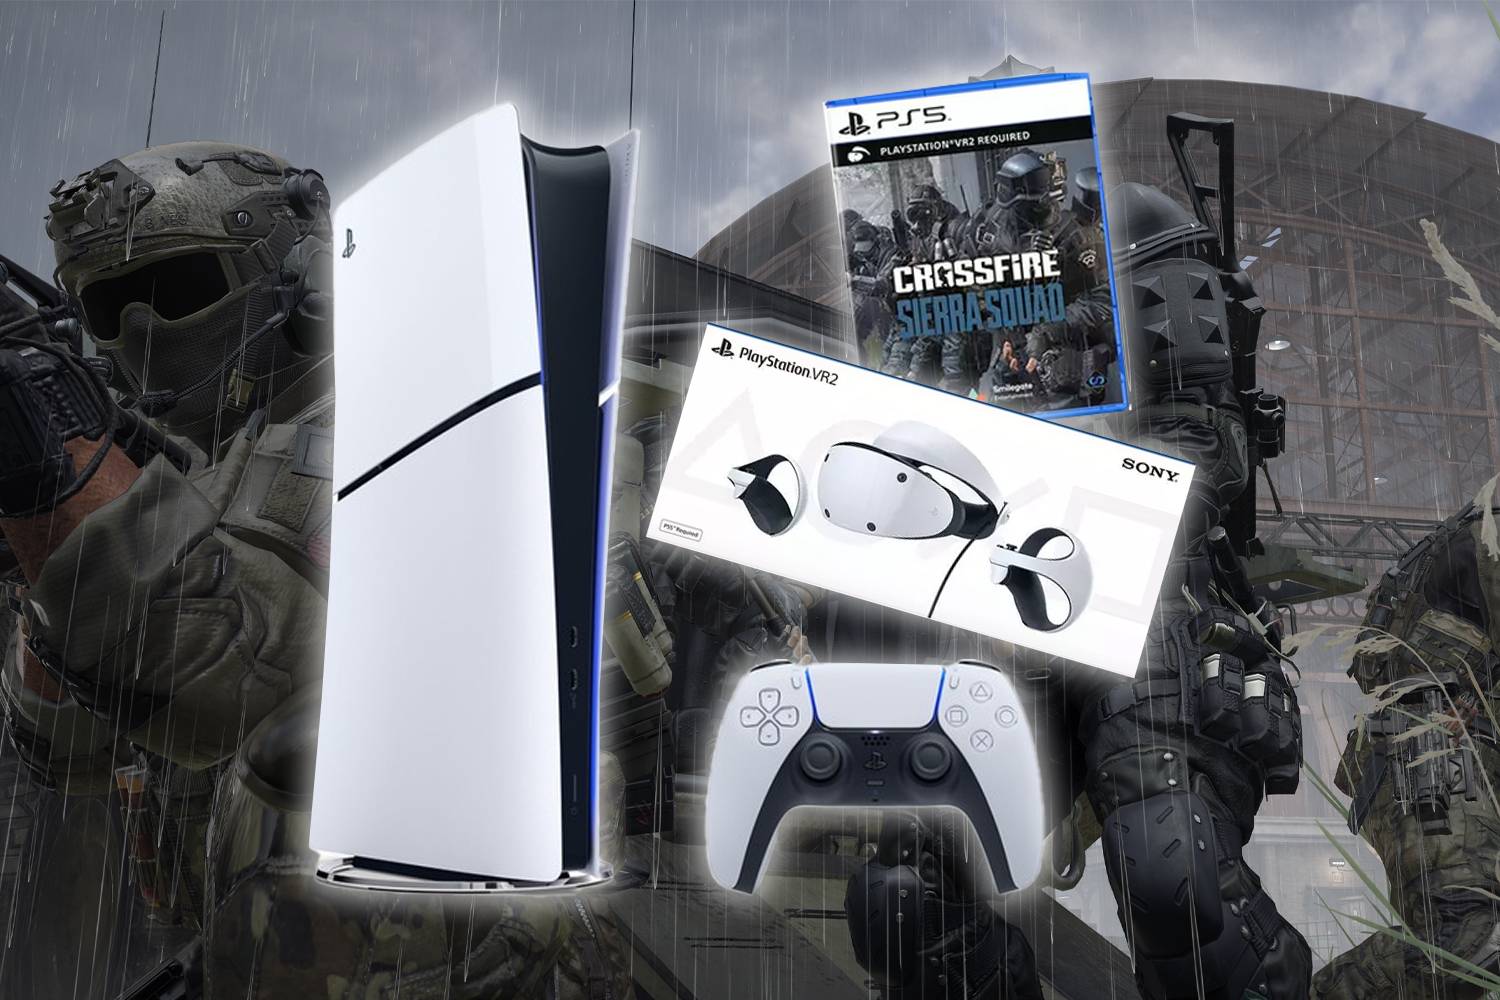 Win this PS5 VR Bundle - Only 999 Entries